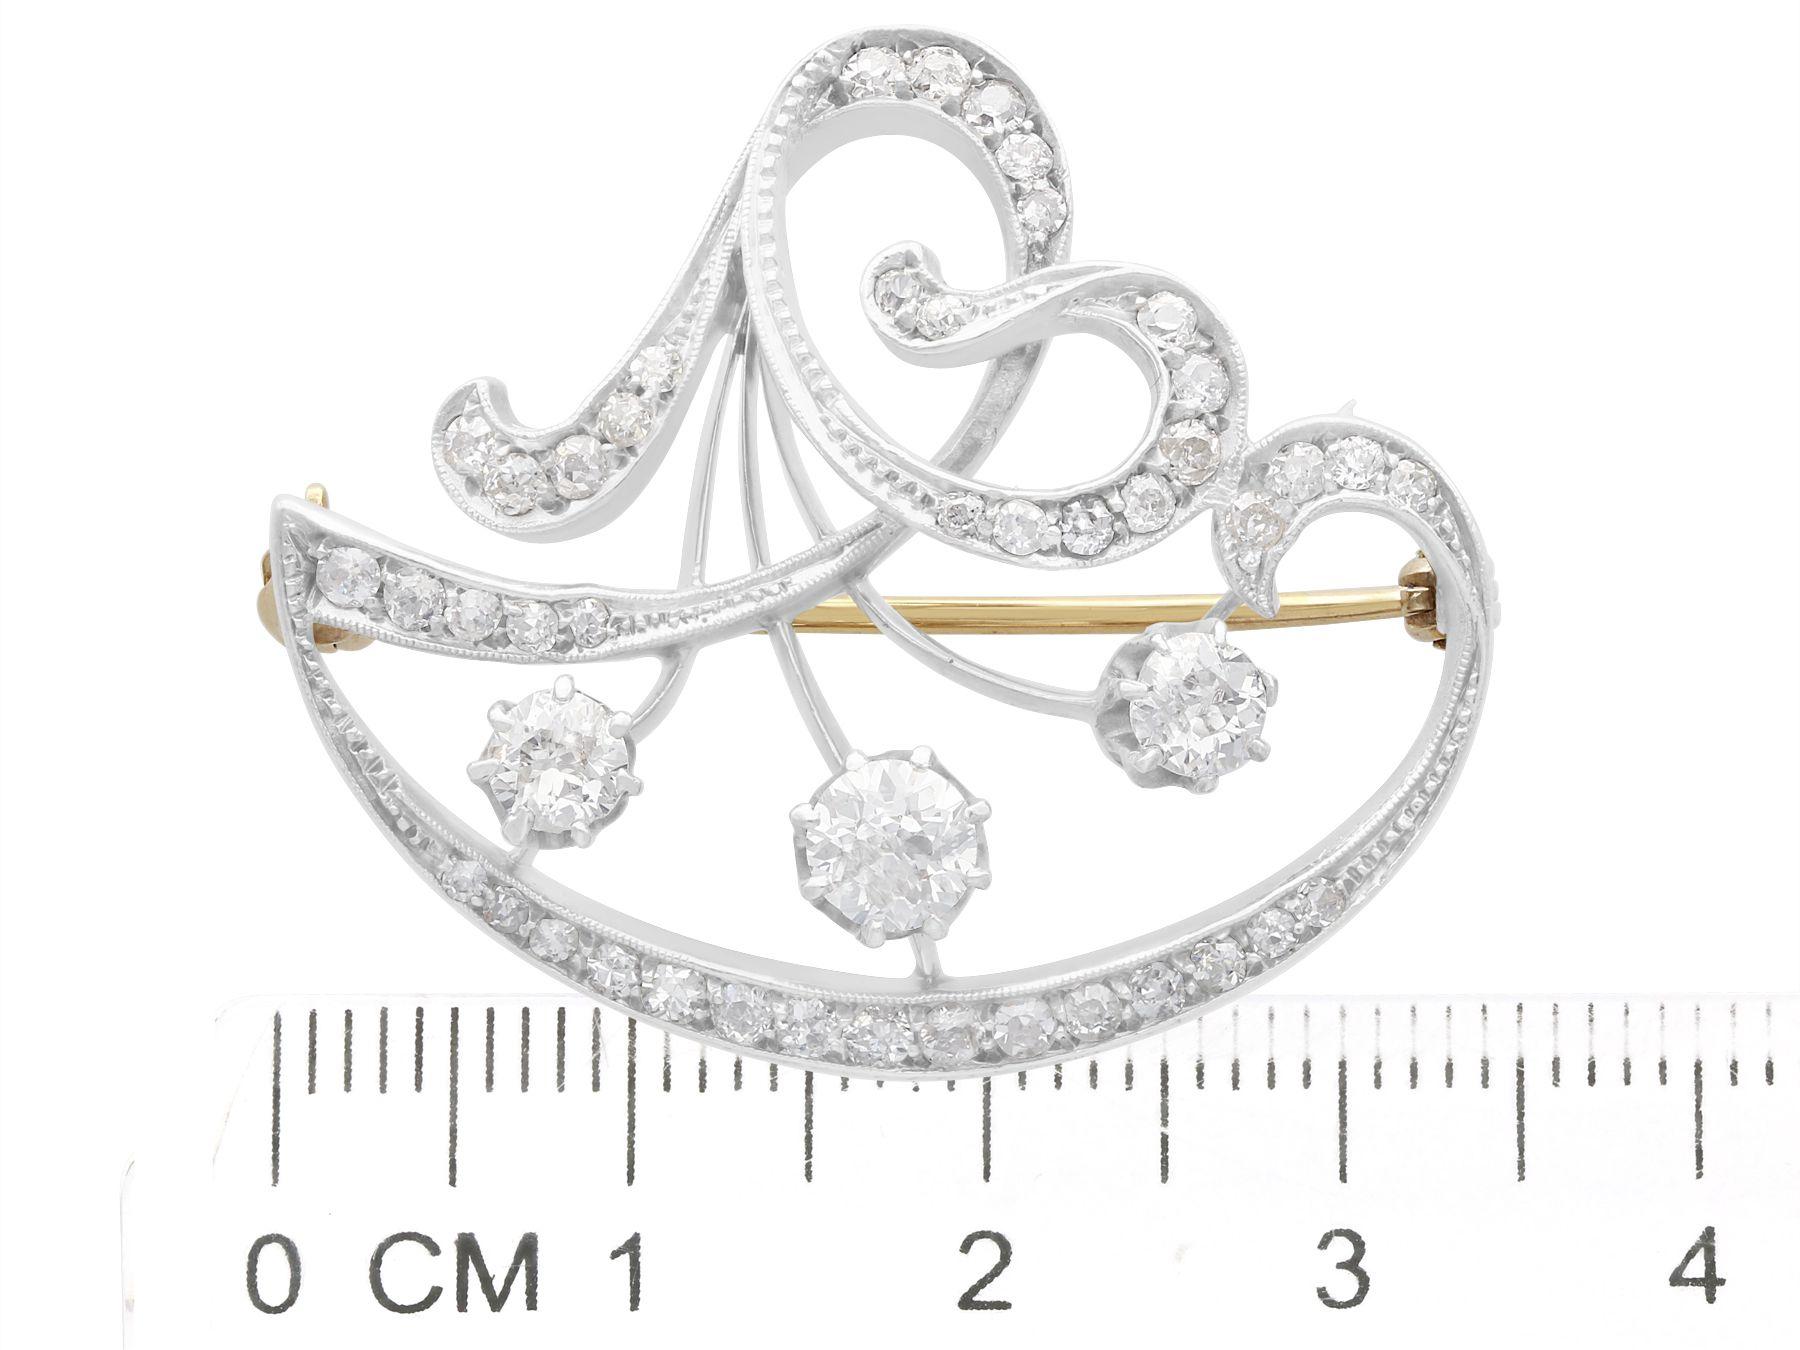 Antique 2.25 Carat Diamond and Yellow Gold Brooch, circa 1890 For Sale 2